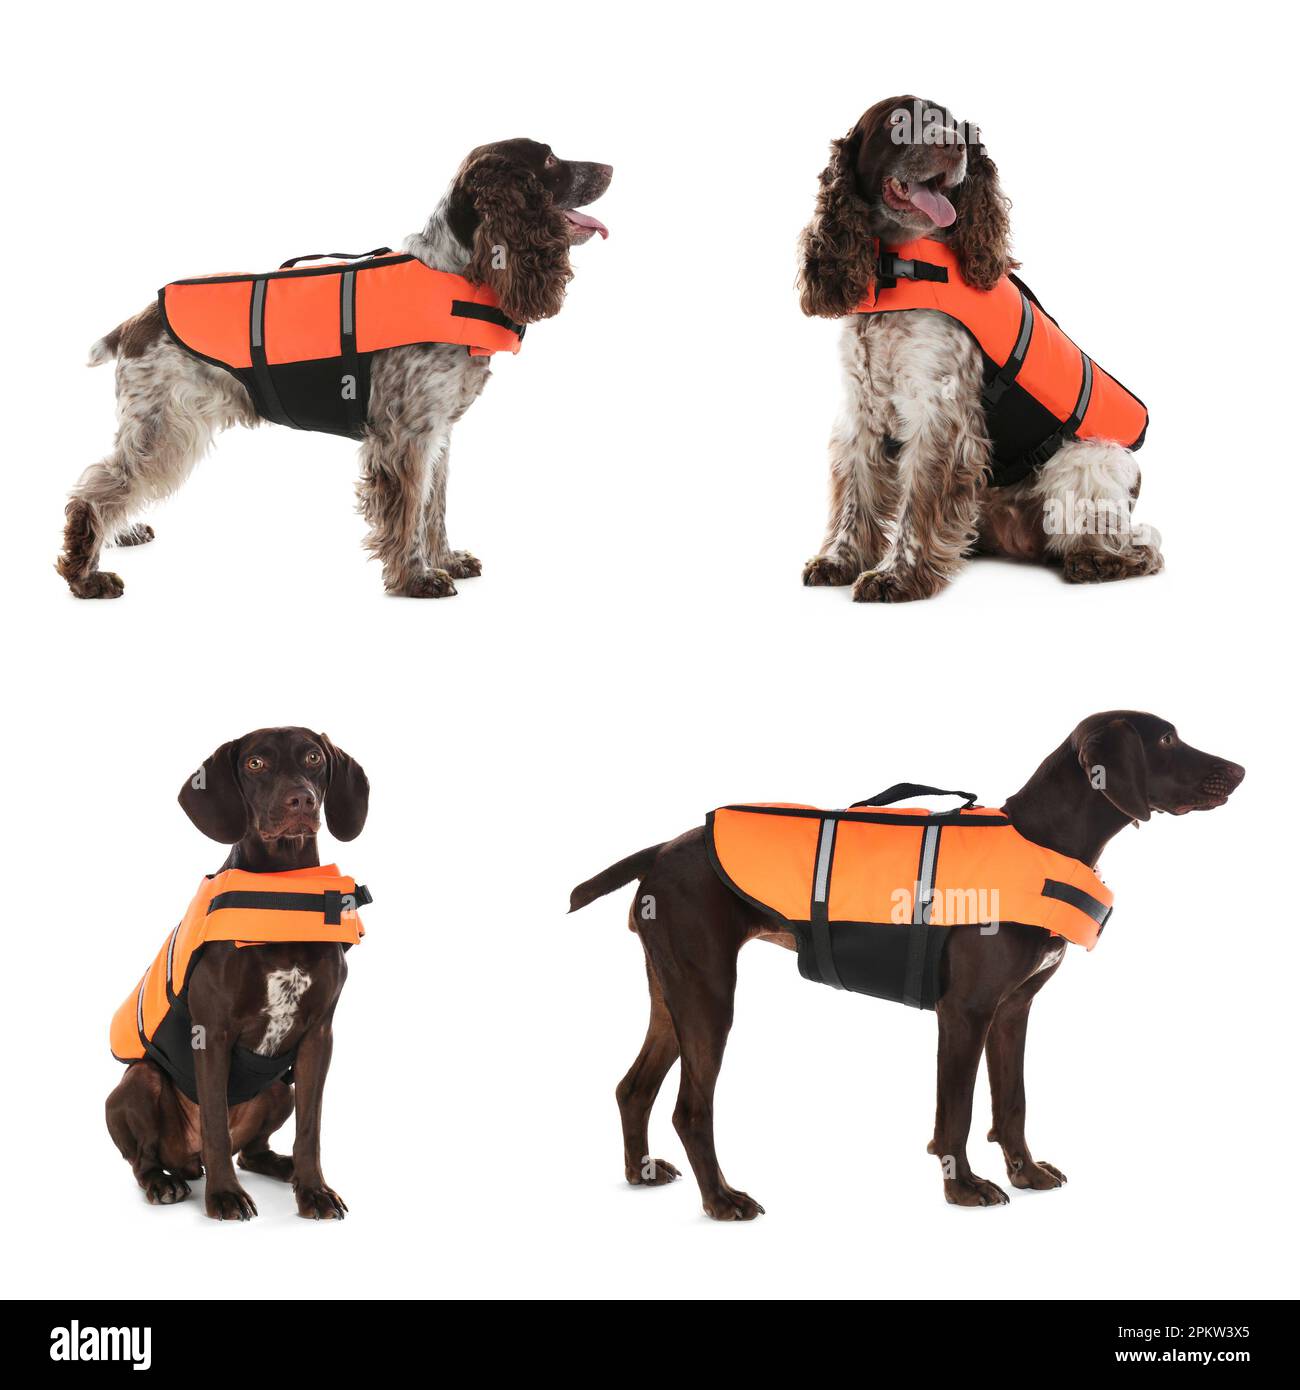 Rescuer dogs in life vests on white background, collage Stock Photo